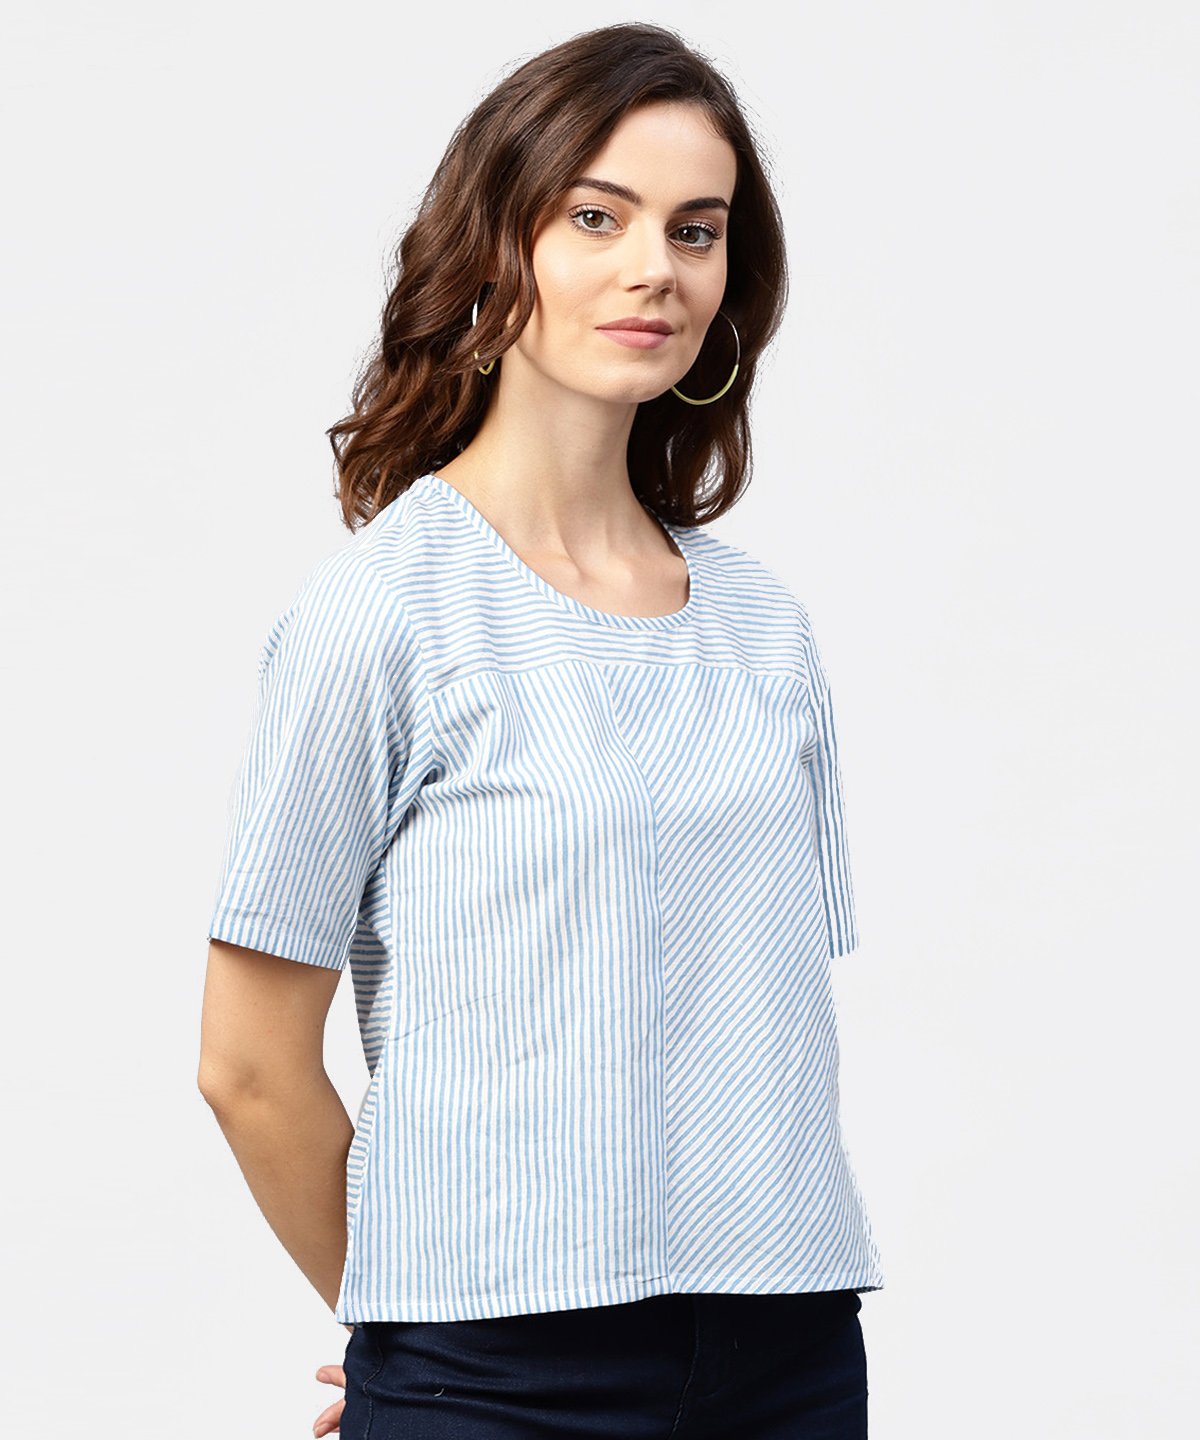 Women's Blue Striped Short Sleeve Top With Round Neck - Nayo Clothing